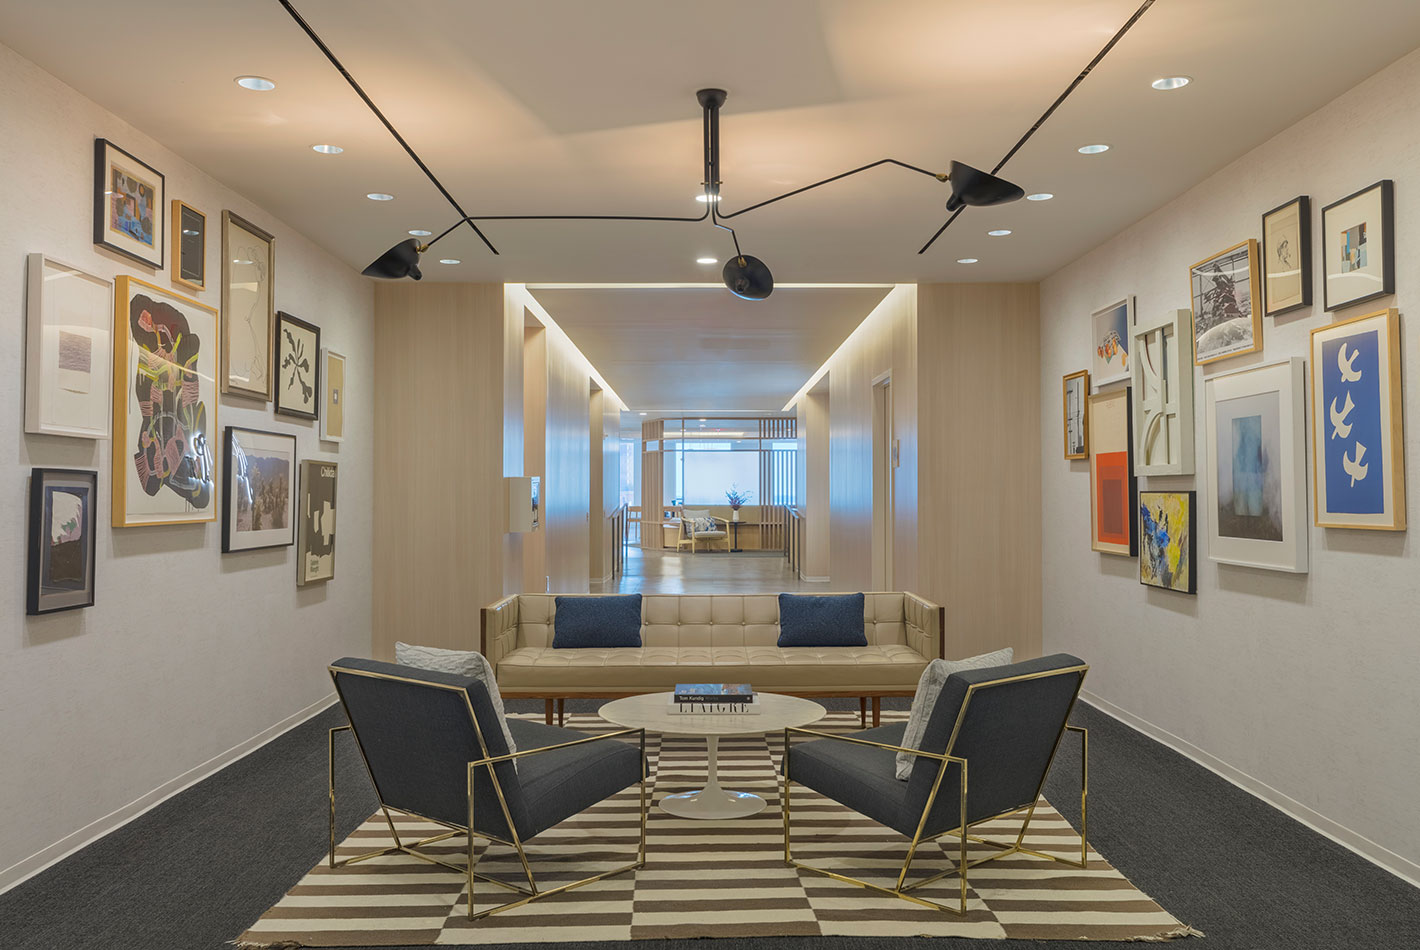 Artworks is hung gallery style on the walls of this casual conference room at J Crew Headquarters. A striped rug anchors a sofa and 2 angular club chairs.